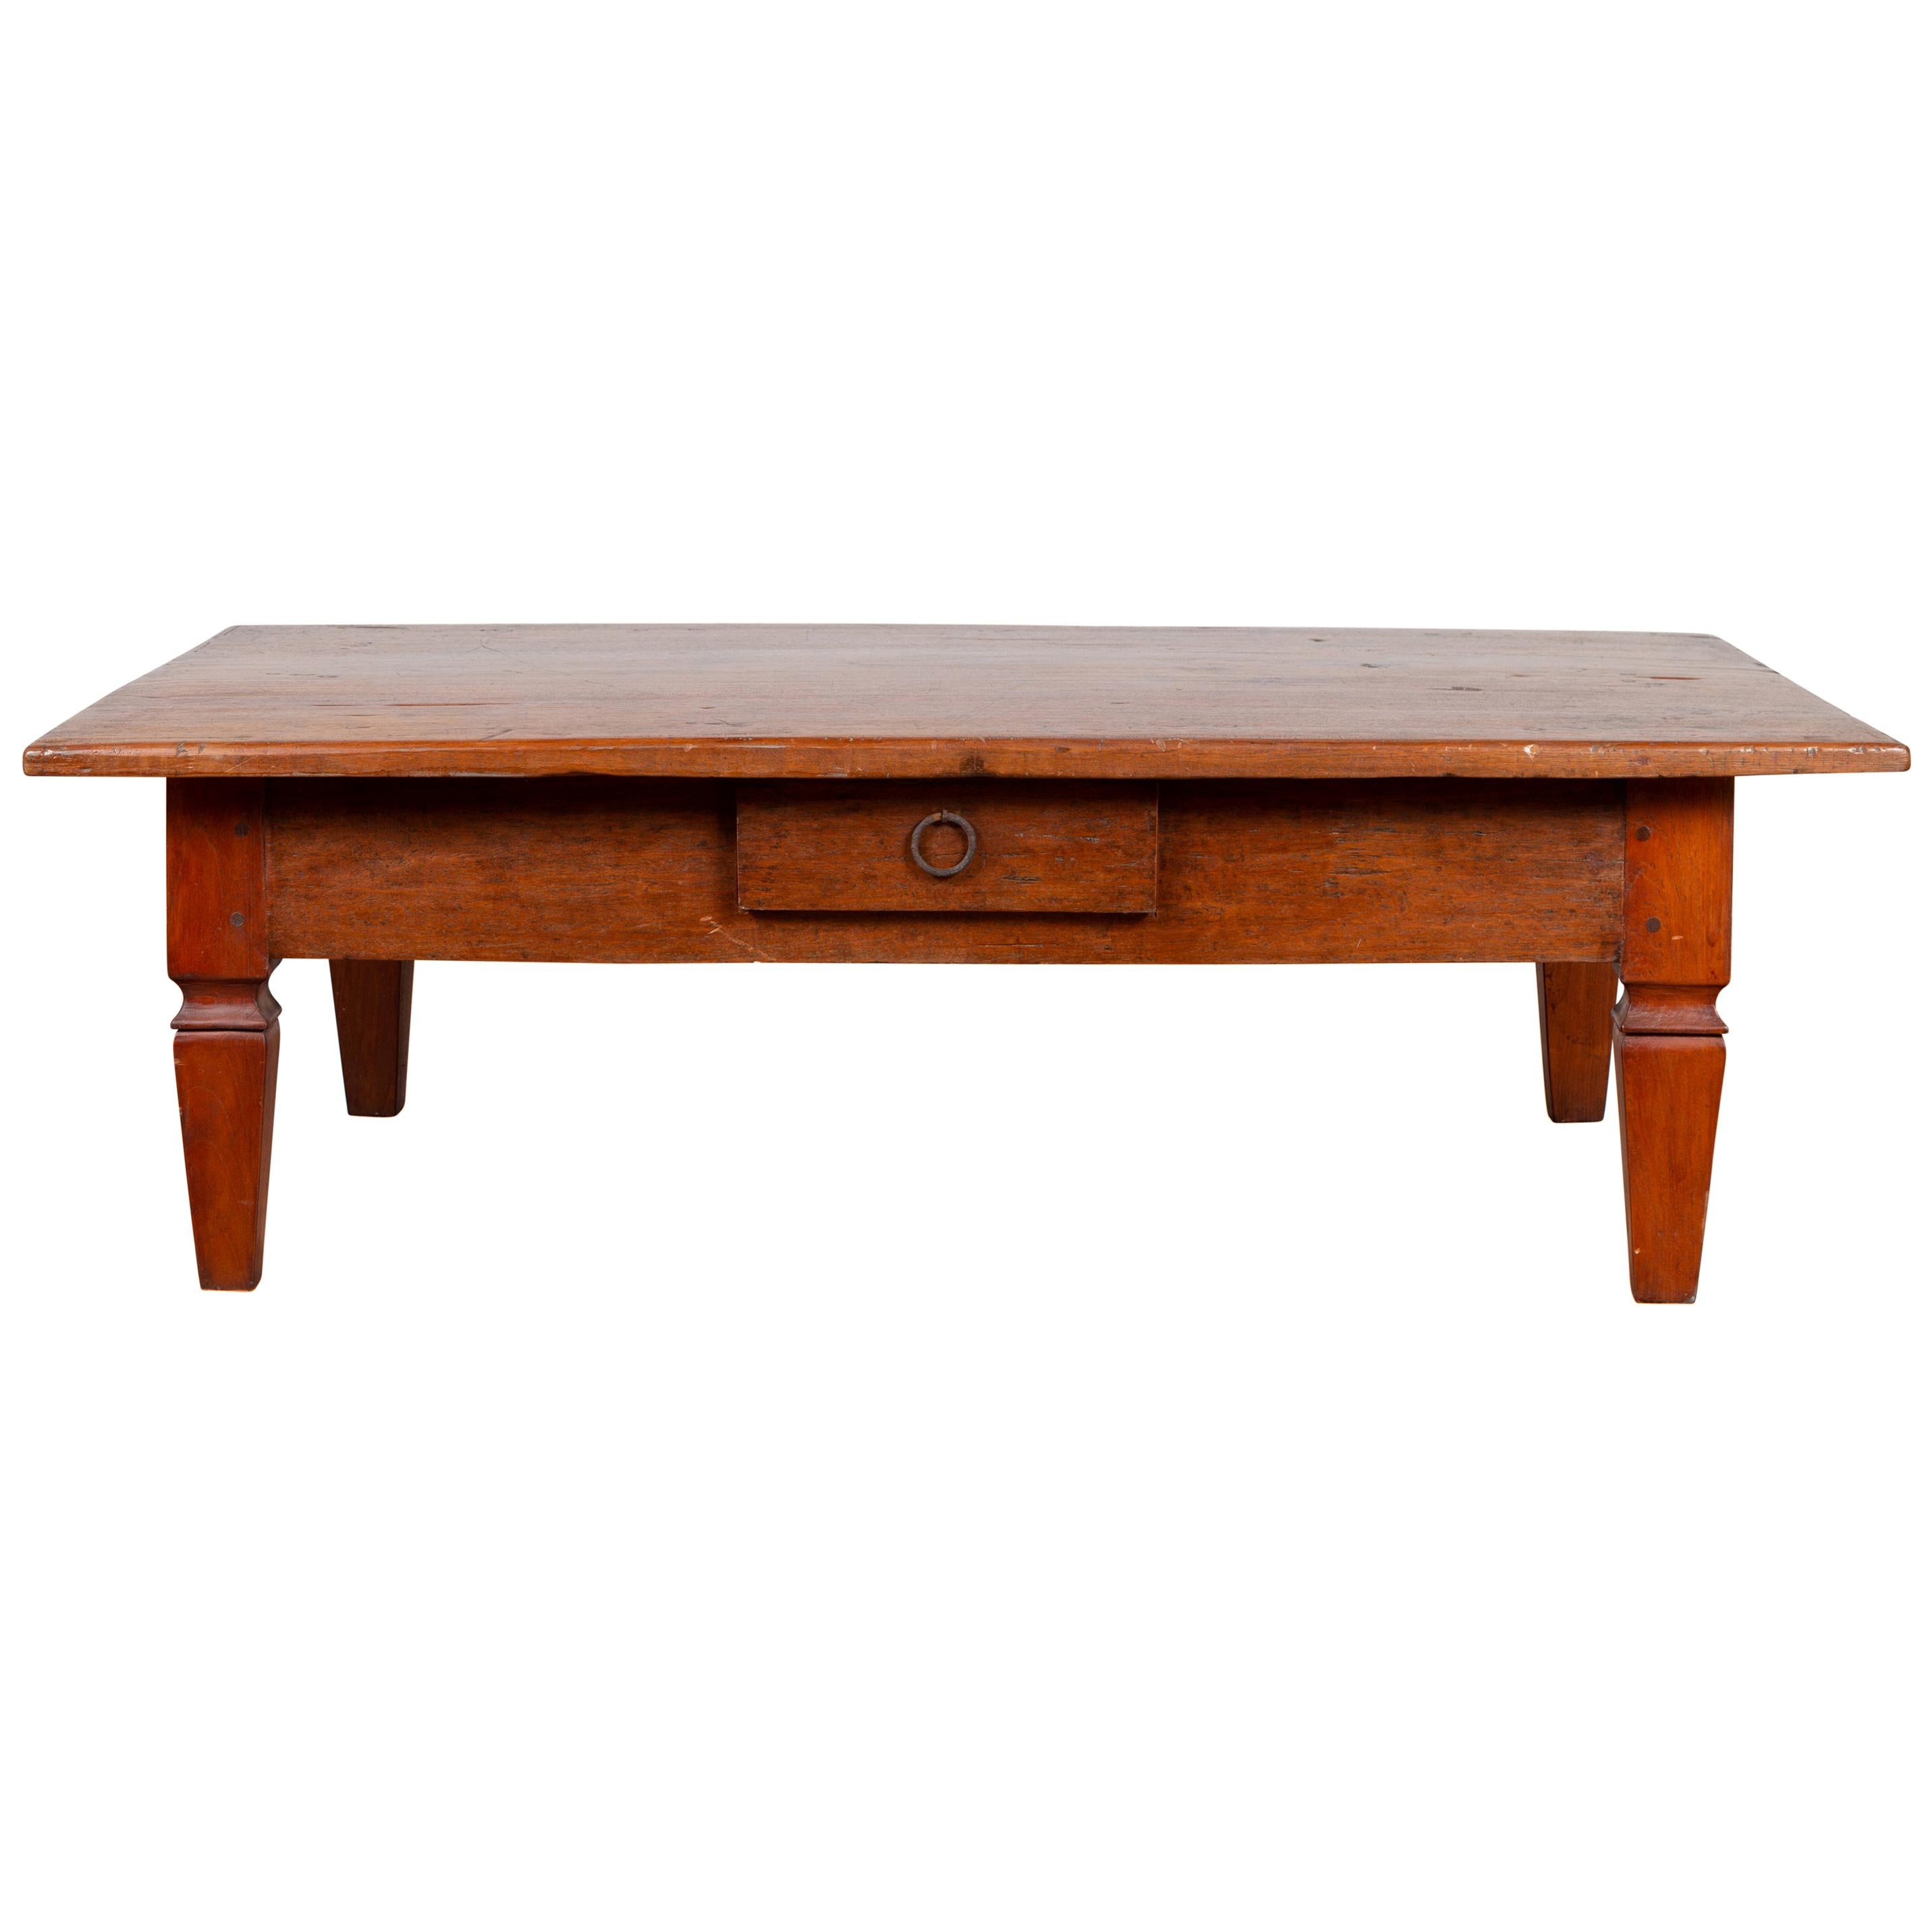 Early 20th Century Javanese Coffee Table with Single Drawer and Tapered Legs